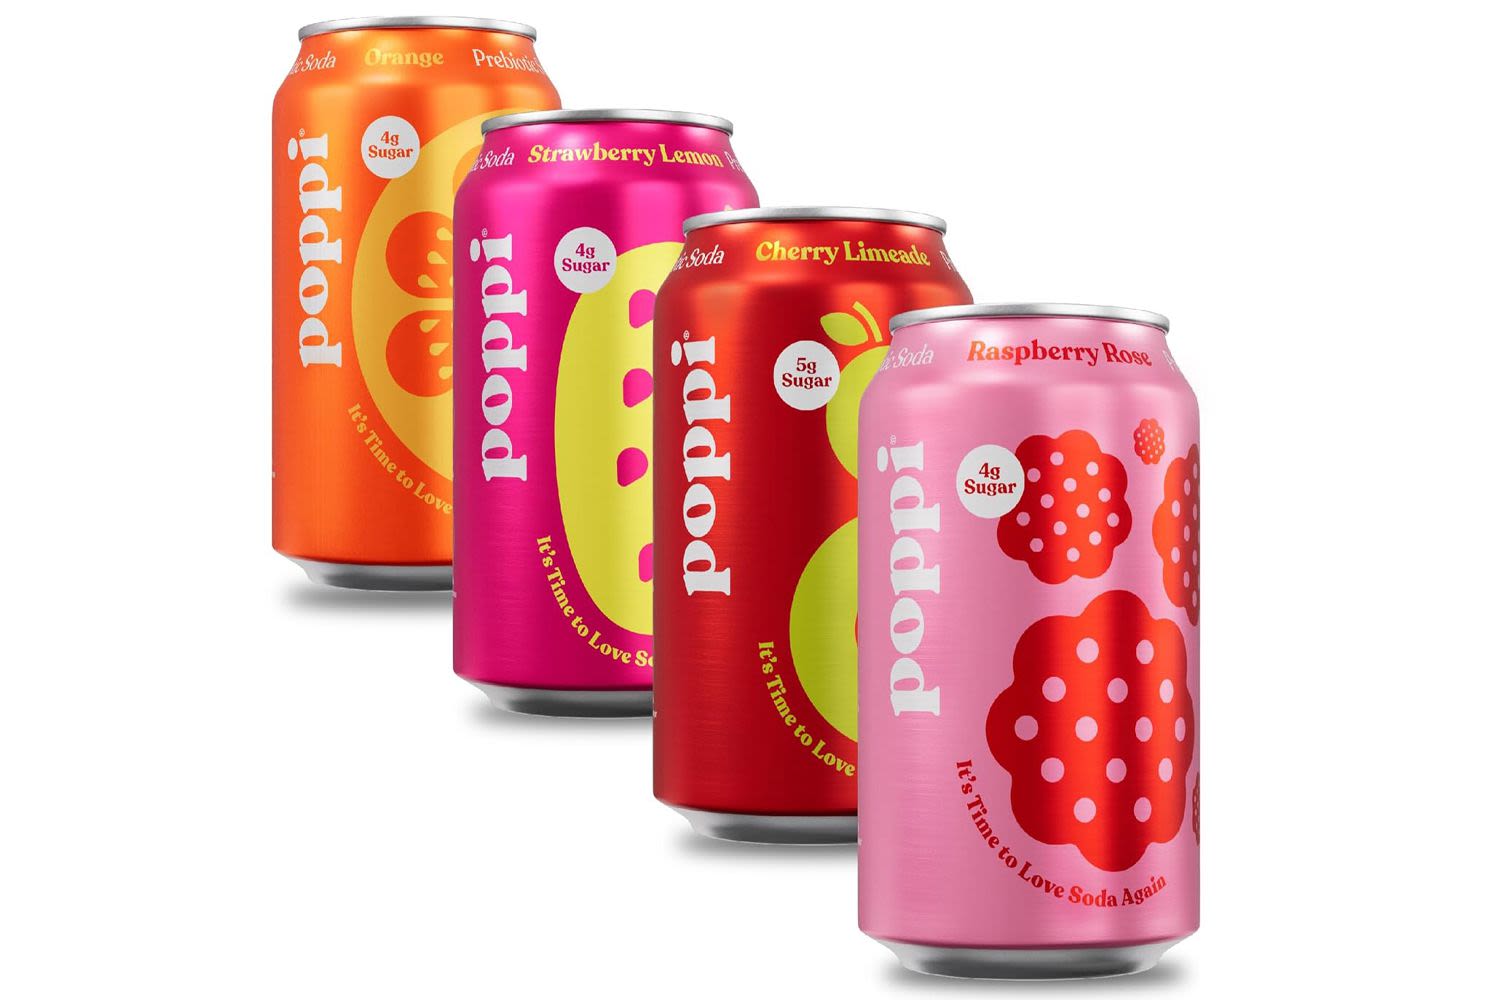 Poppi 'Prebiotic Soda' Sued on Claims of Consumer Fraud, ‘False and Misleading Advertising’